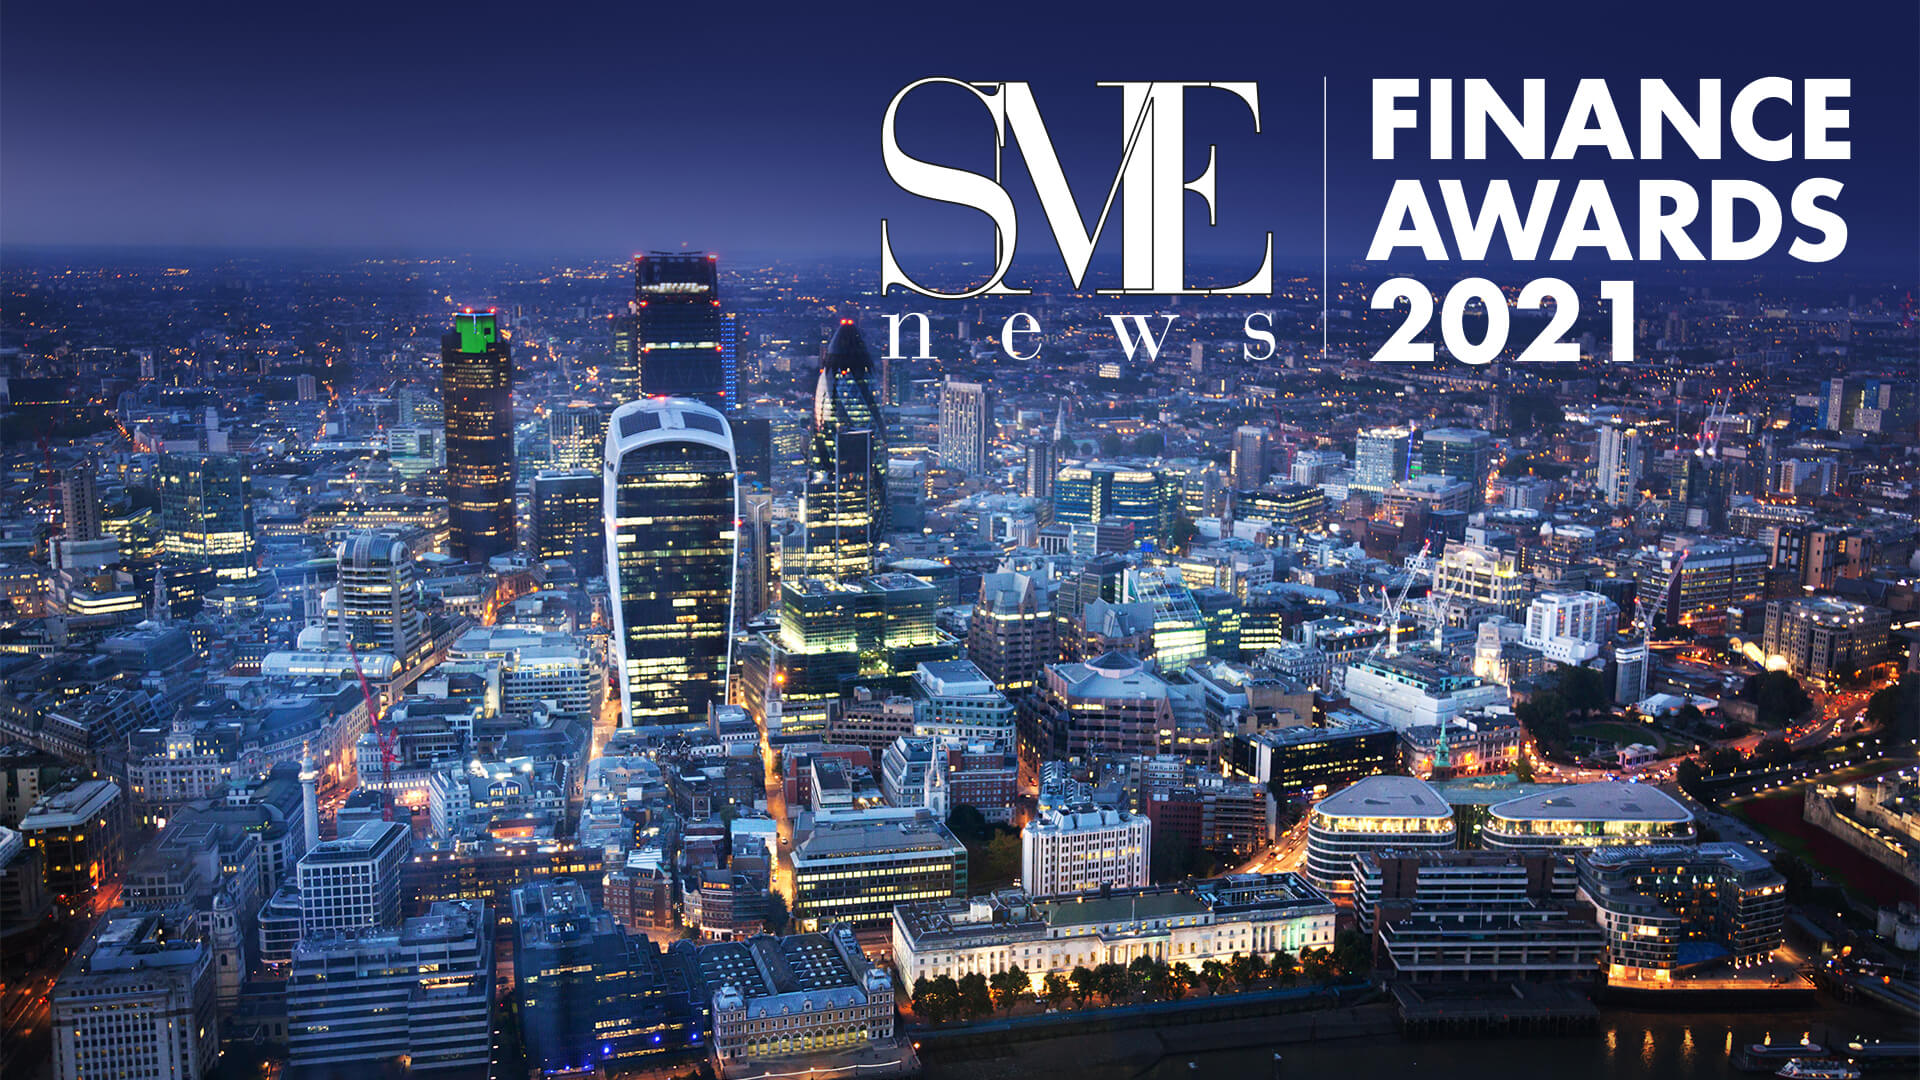 SME New Finanace Awards logo with a city skyline of the London finance district in the background